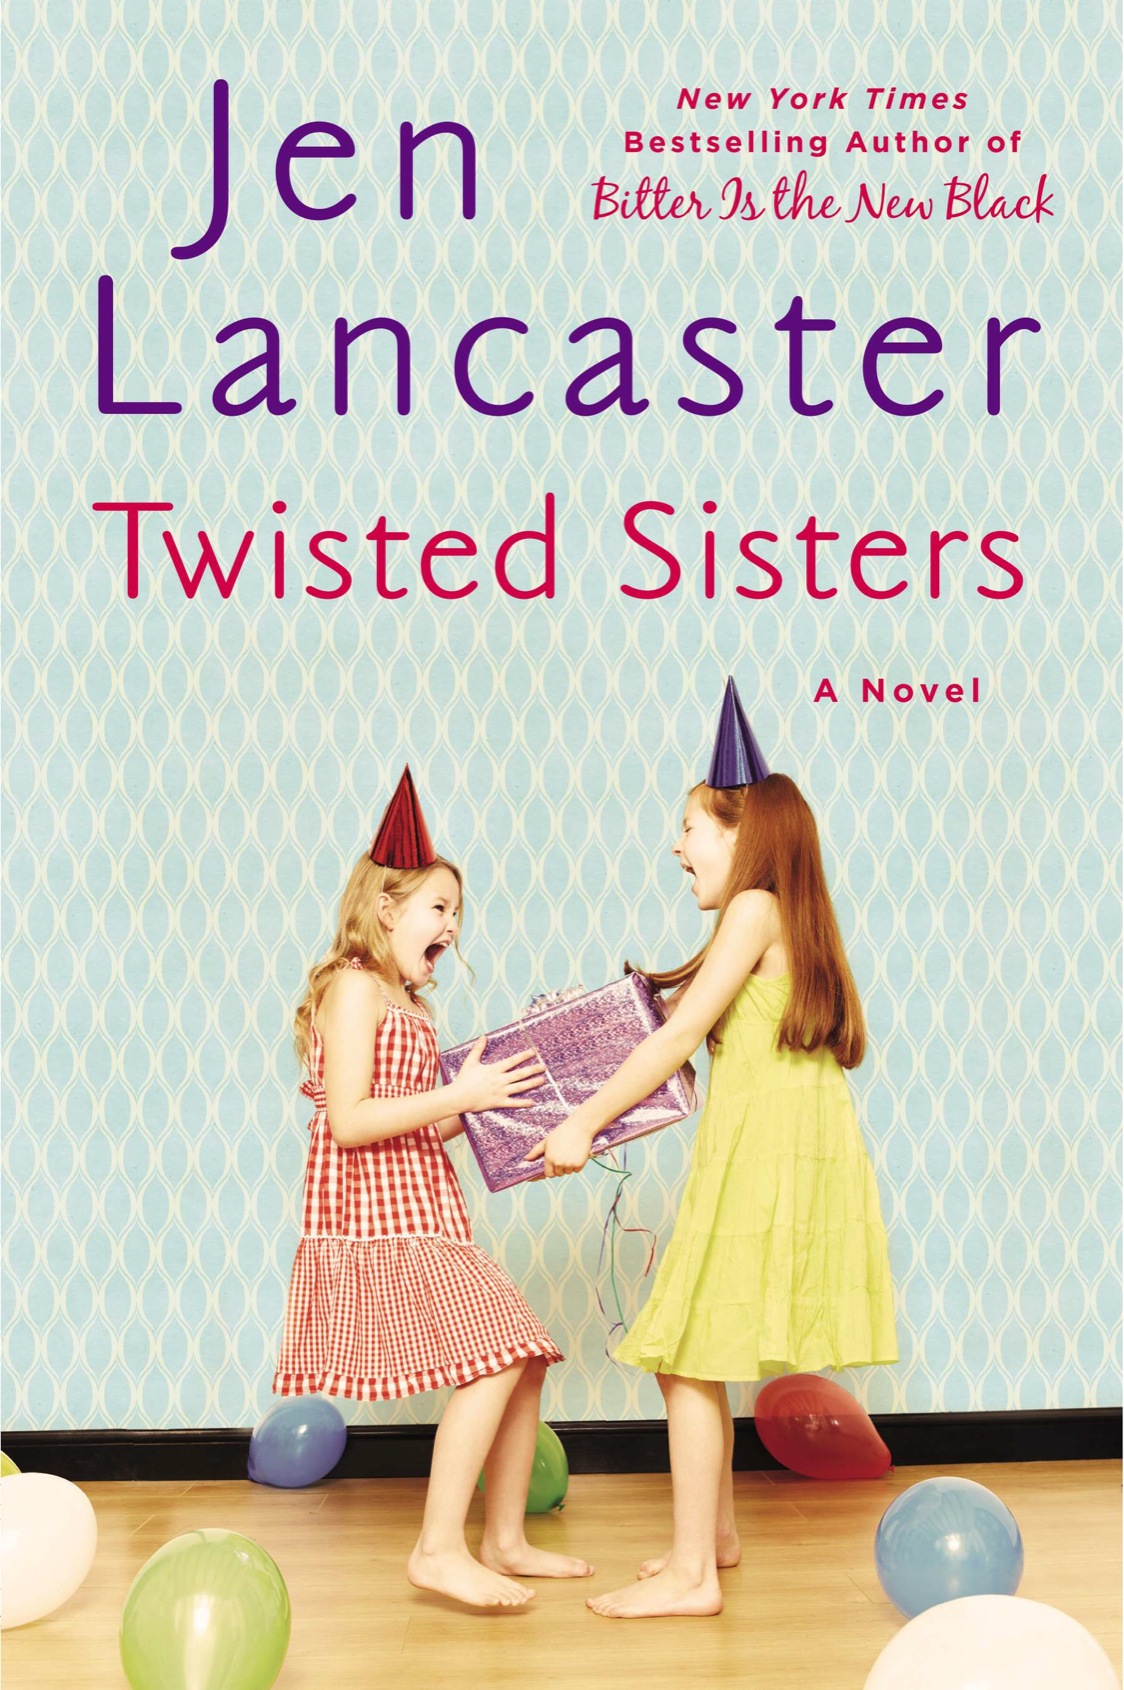 Twisted Sisters (2014) by Jen Lancaster